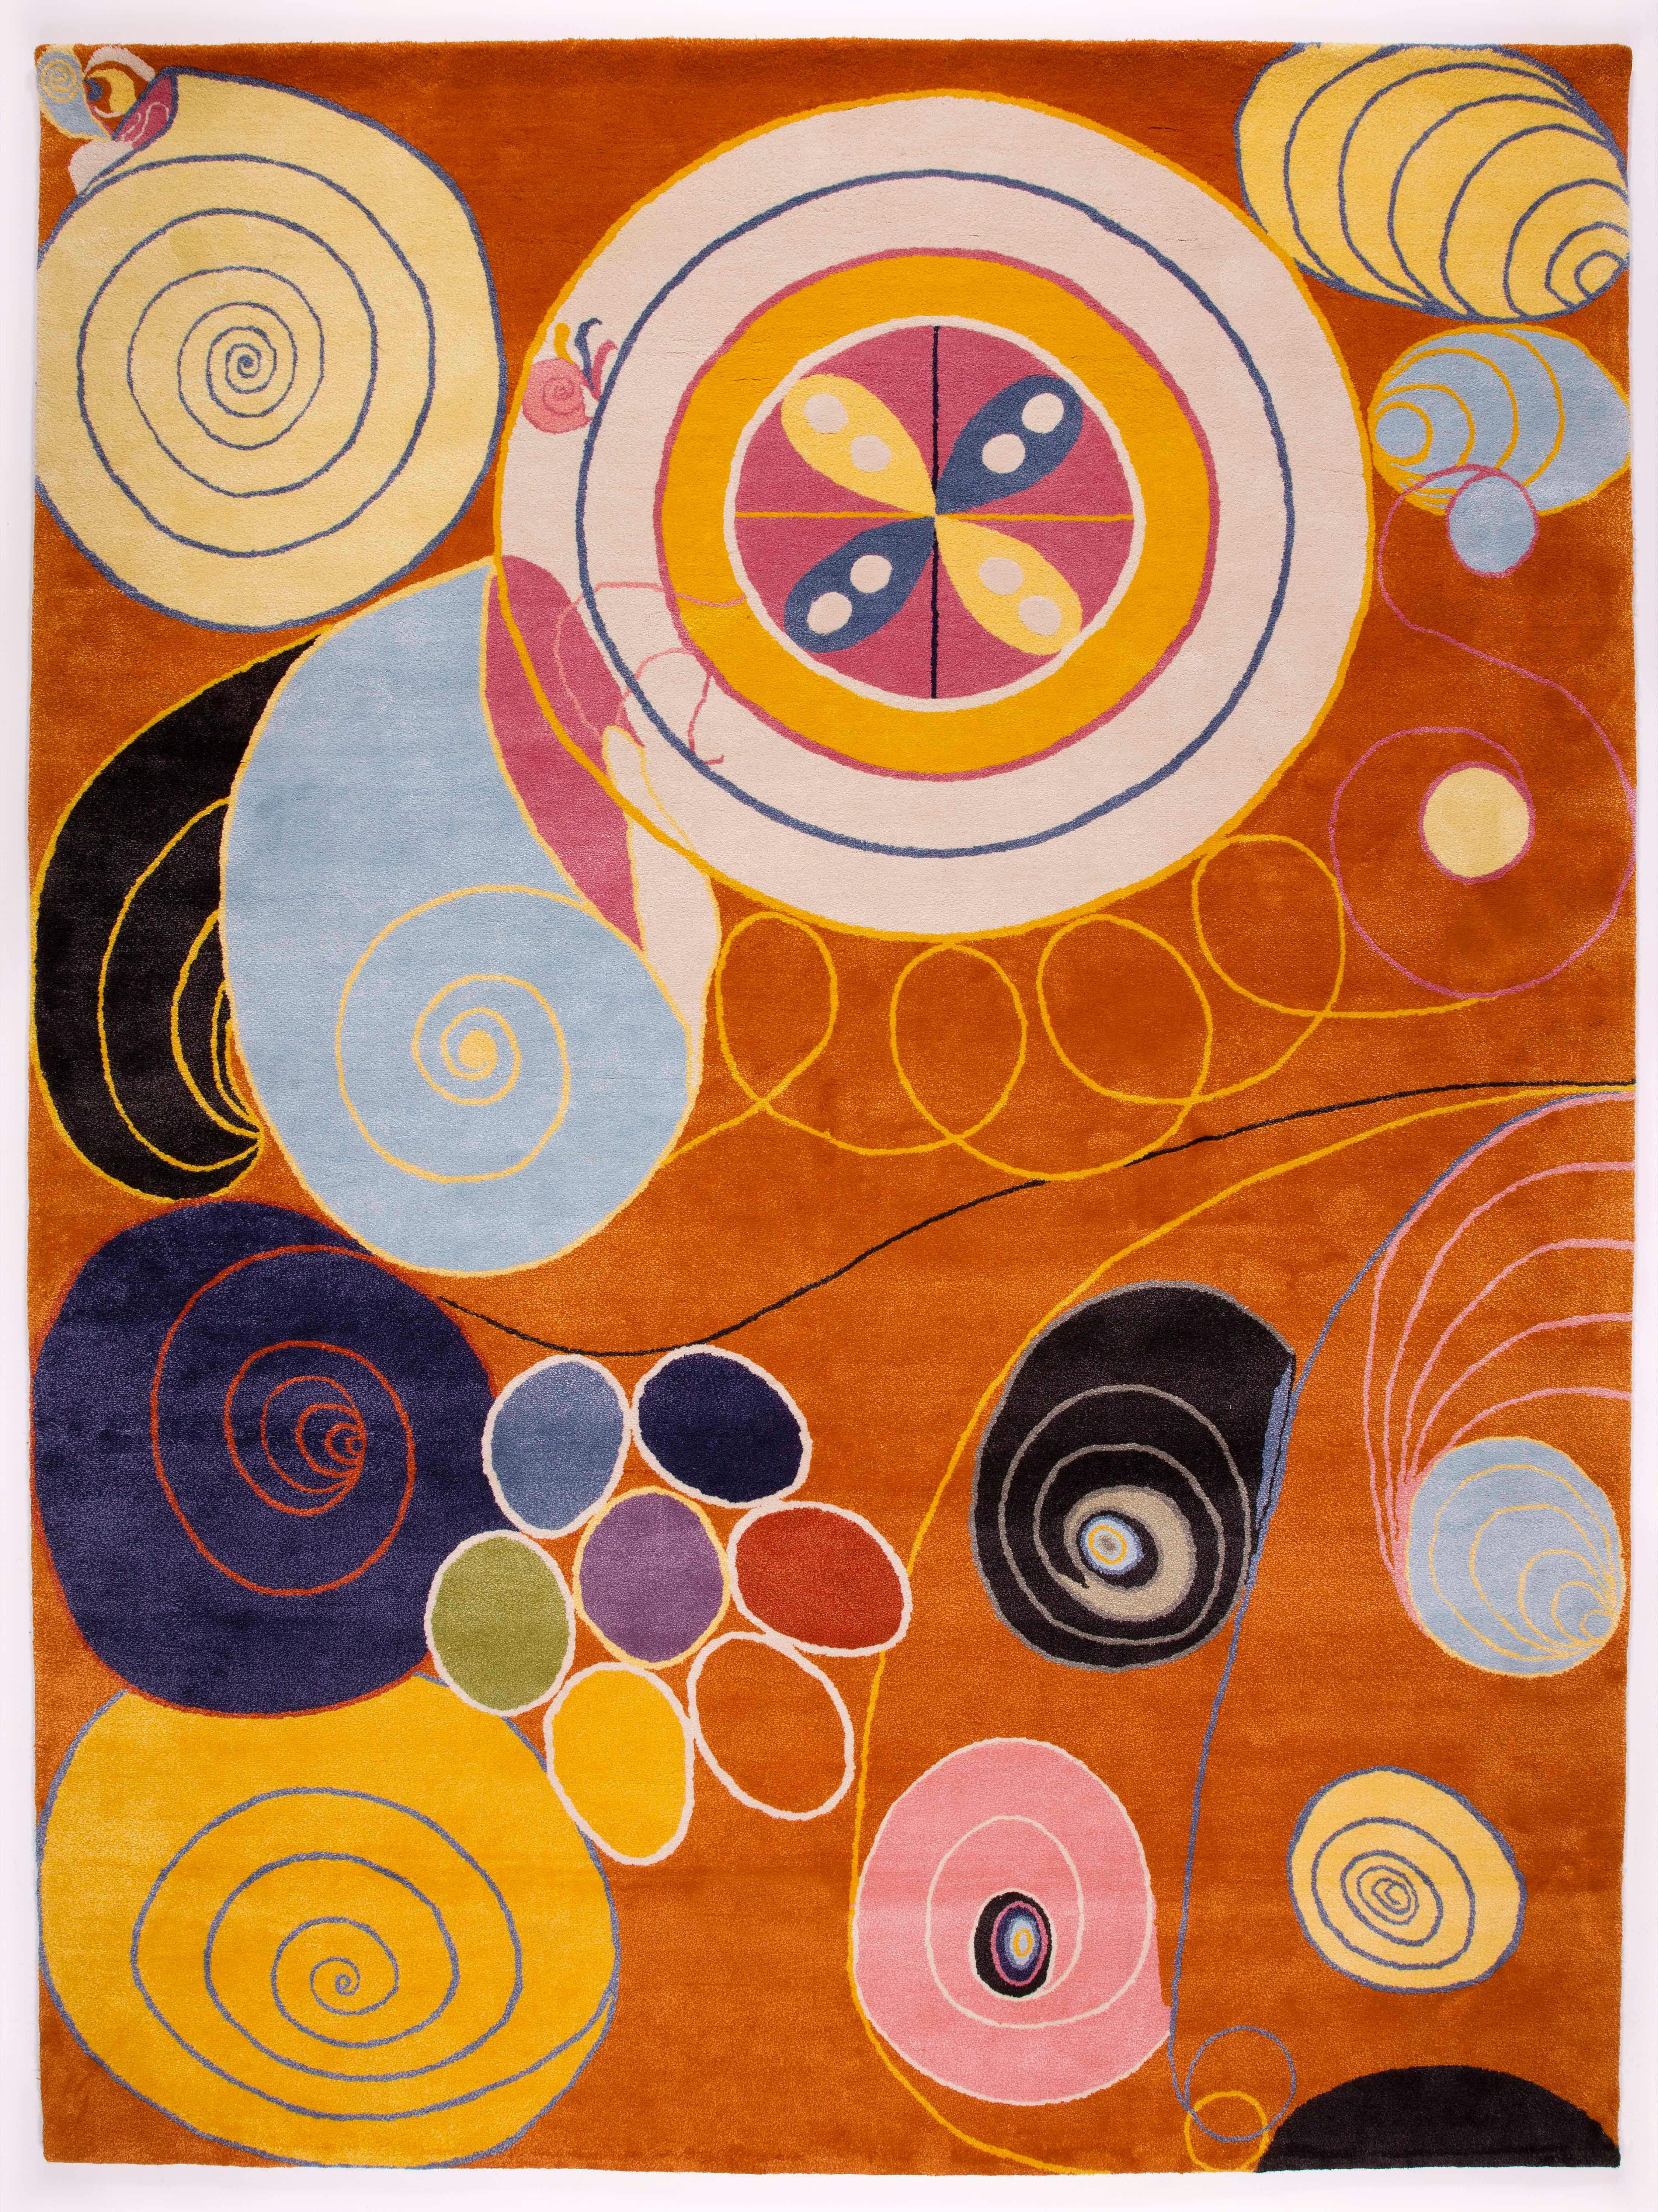 Hilma af Klint Abstract Print - Group IV, no 3. The Ten Largest, Youth (1907), 2018